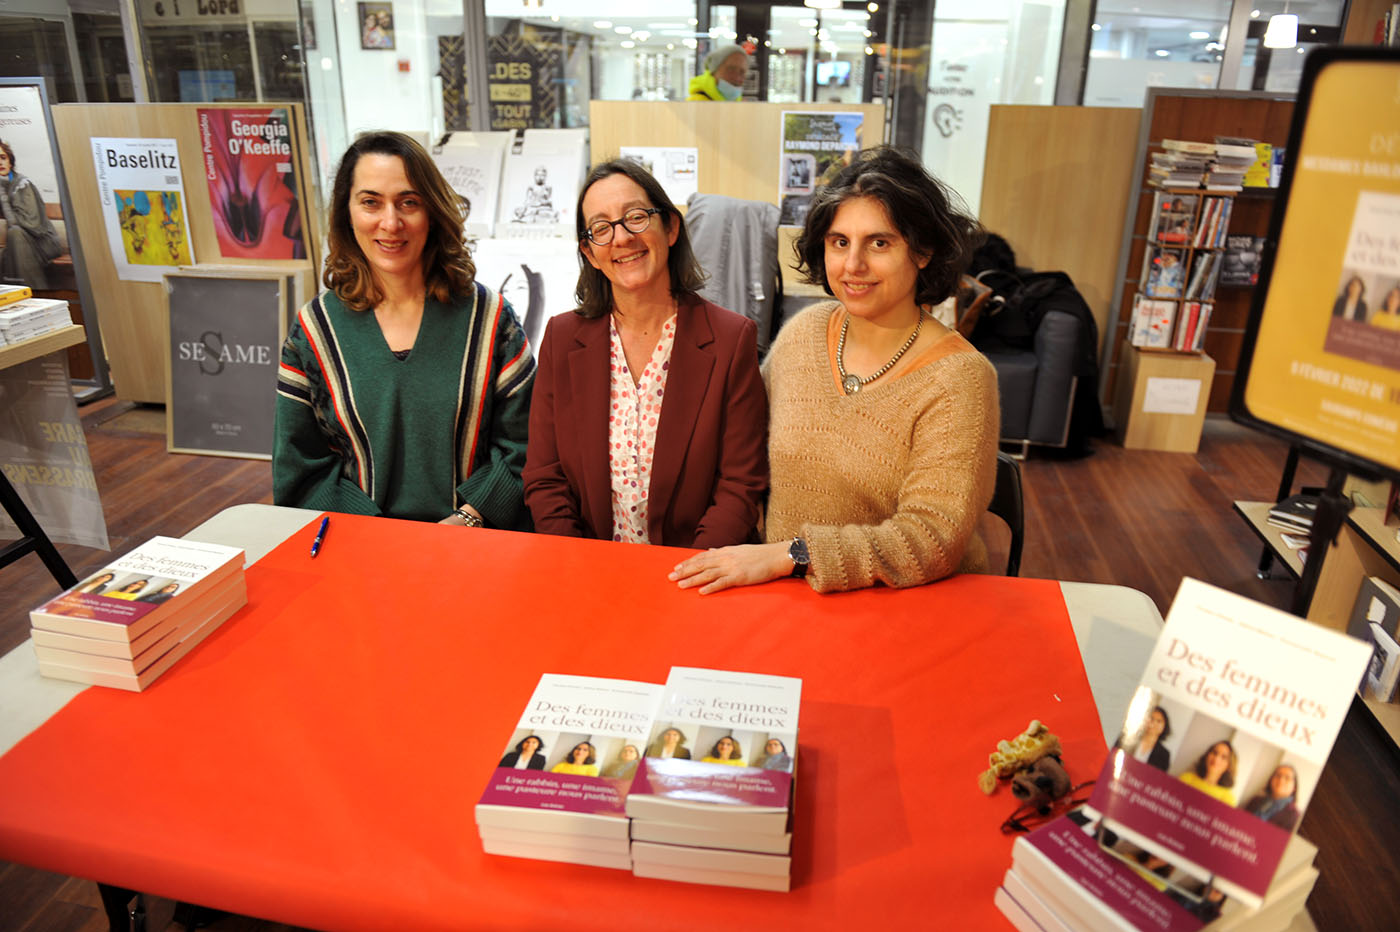 On Women and Gods: Three Female Clerics Came Together - The Markaz Review